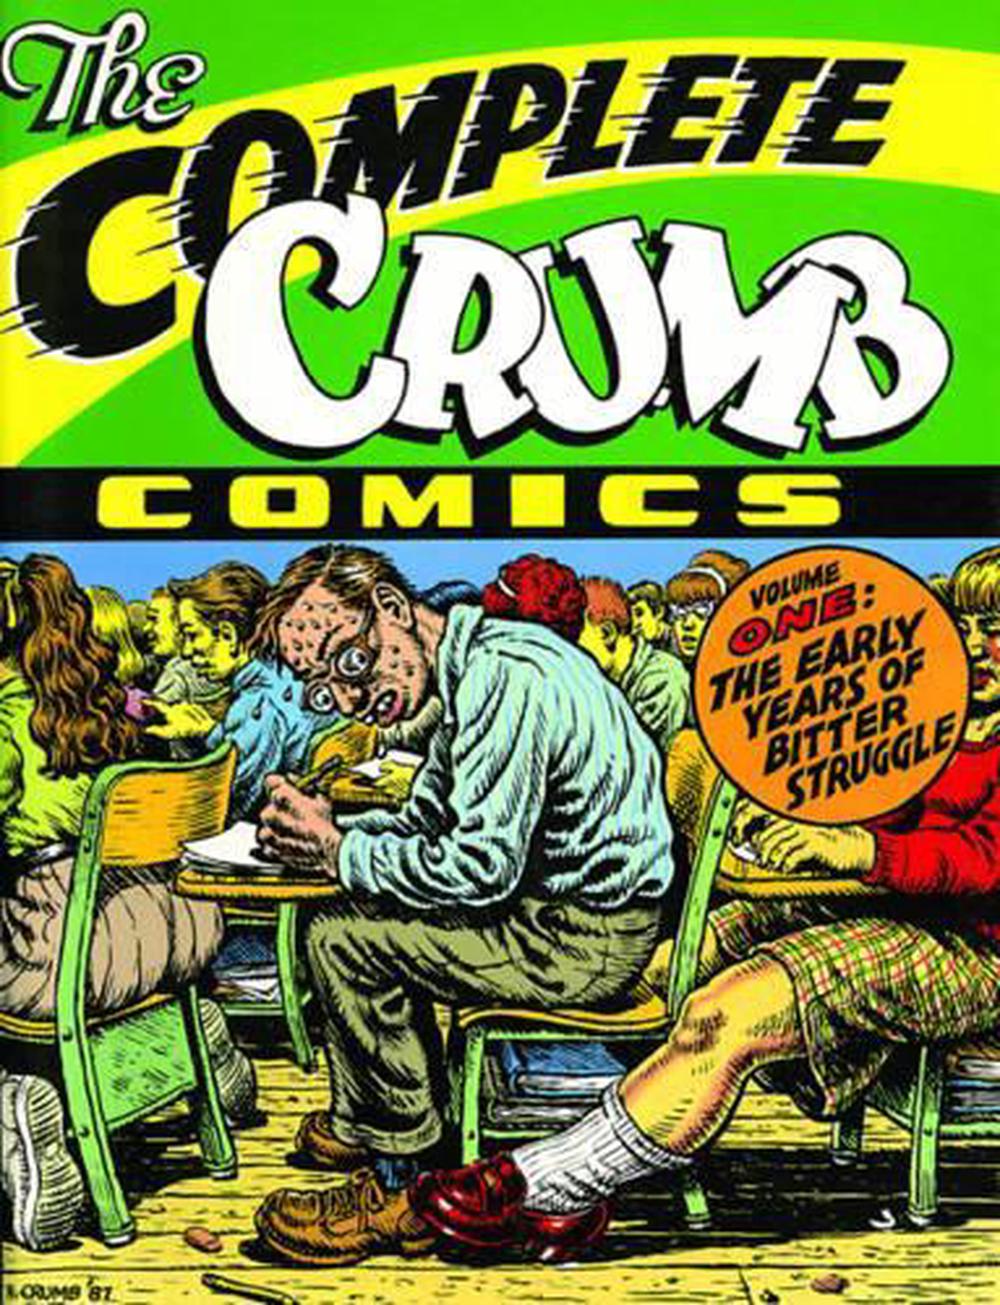 The Complete Crumb Comics The Early Years Of Bitter Struggle By Robert 